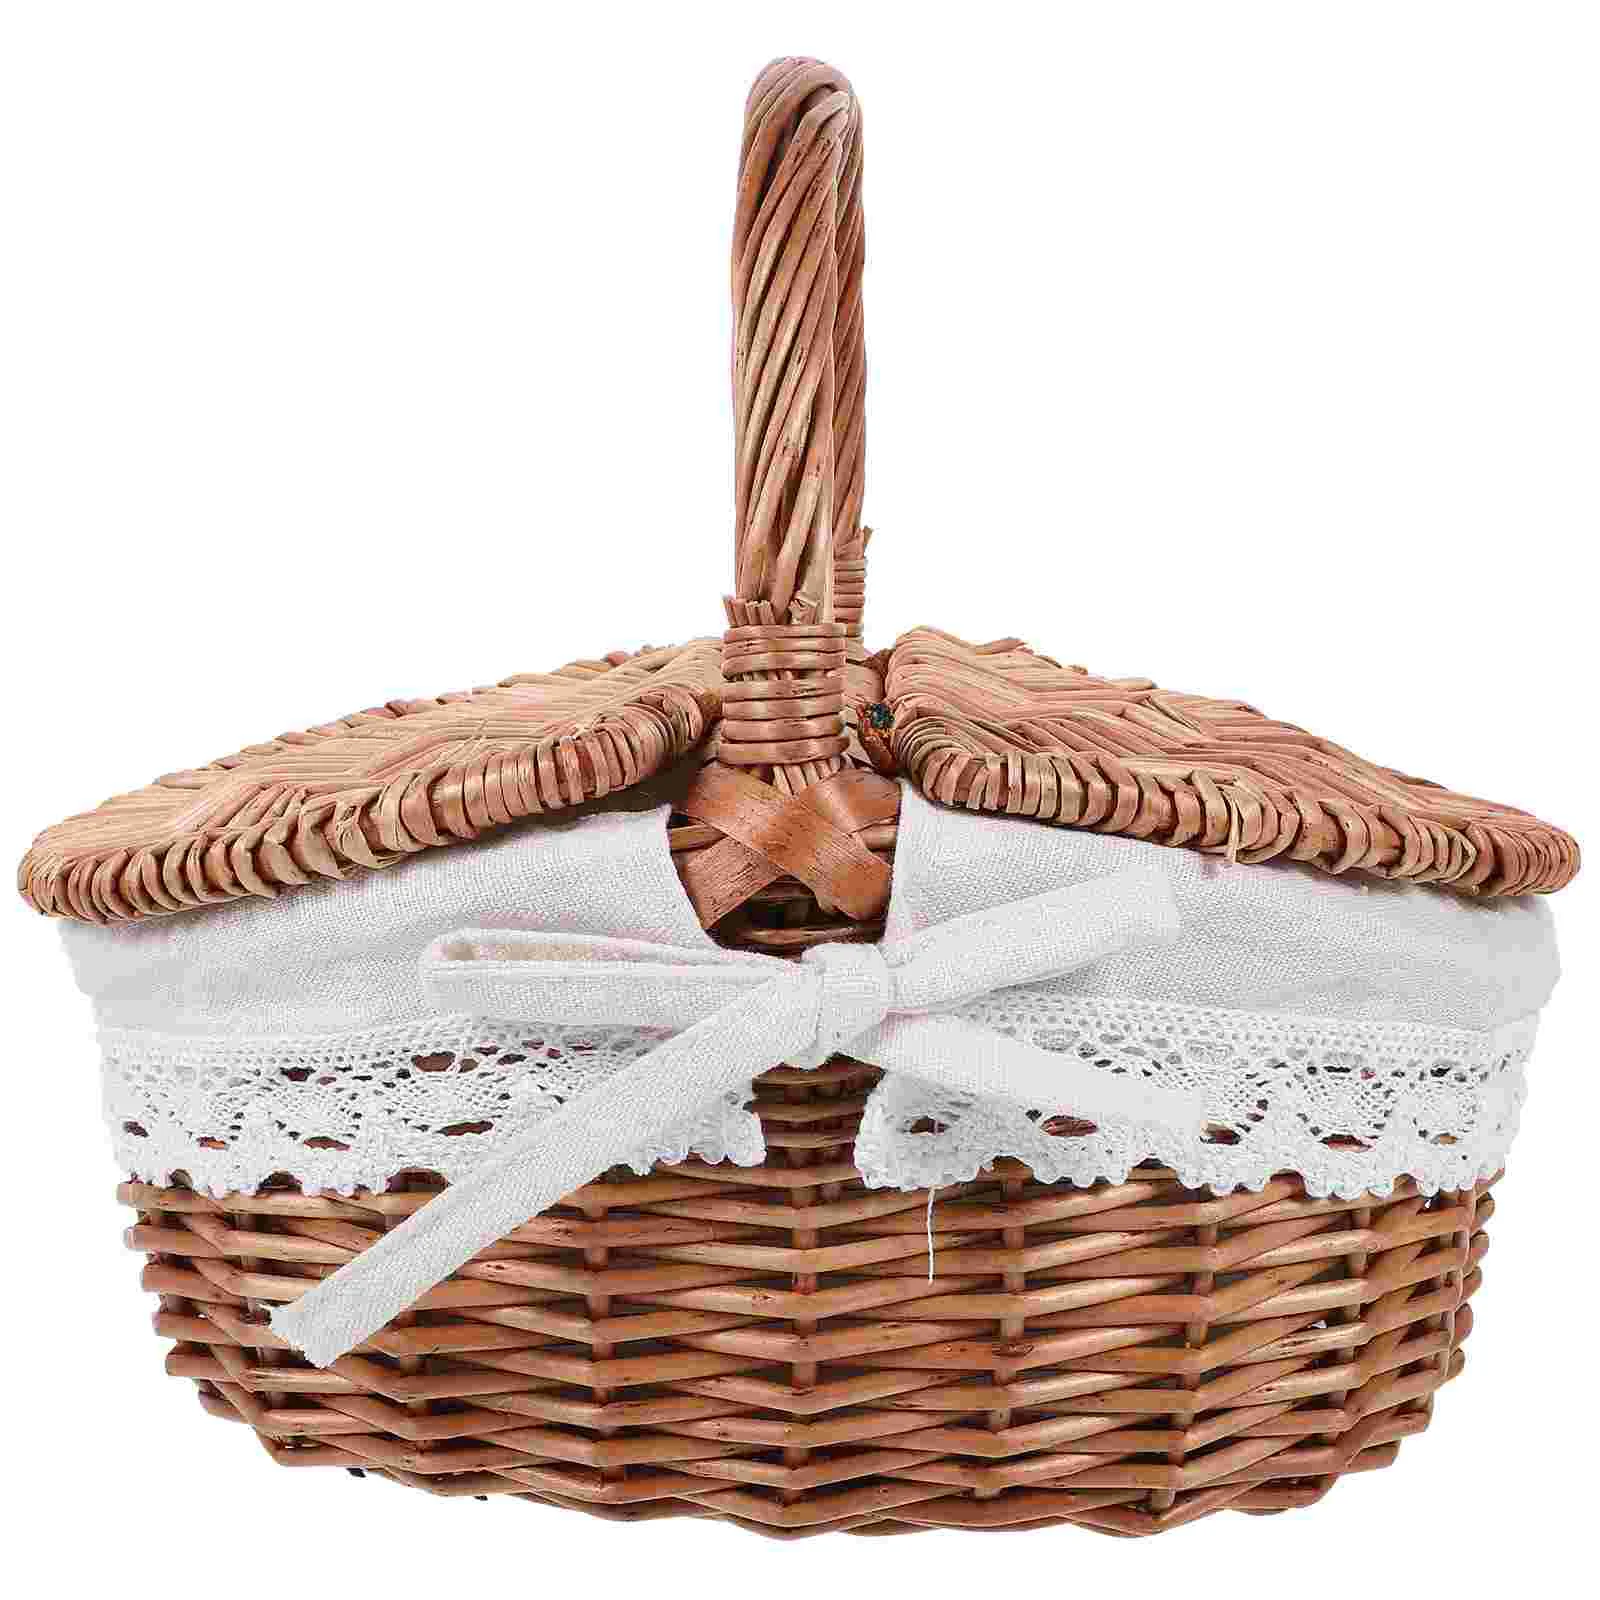 

Picnic Fruit Storage Basket Easter Household Snack Container Wicker Basket with Lid Multi-function Wicker Basket Home Supply